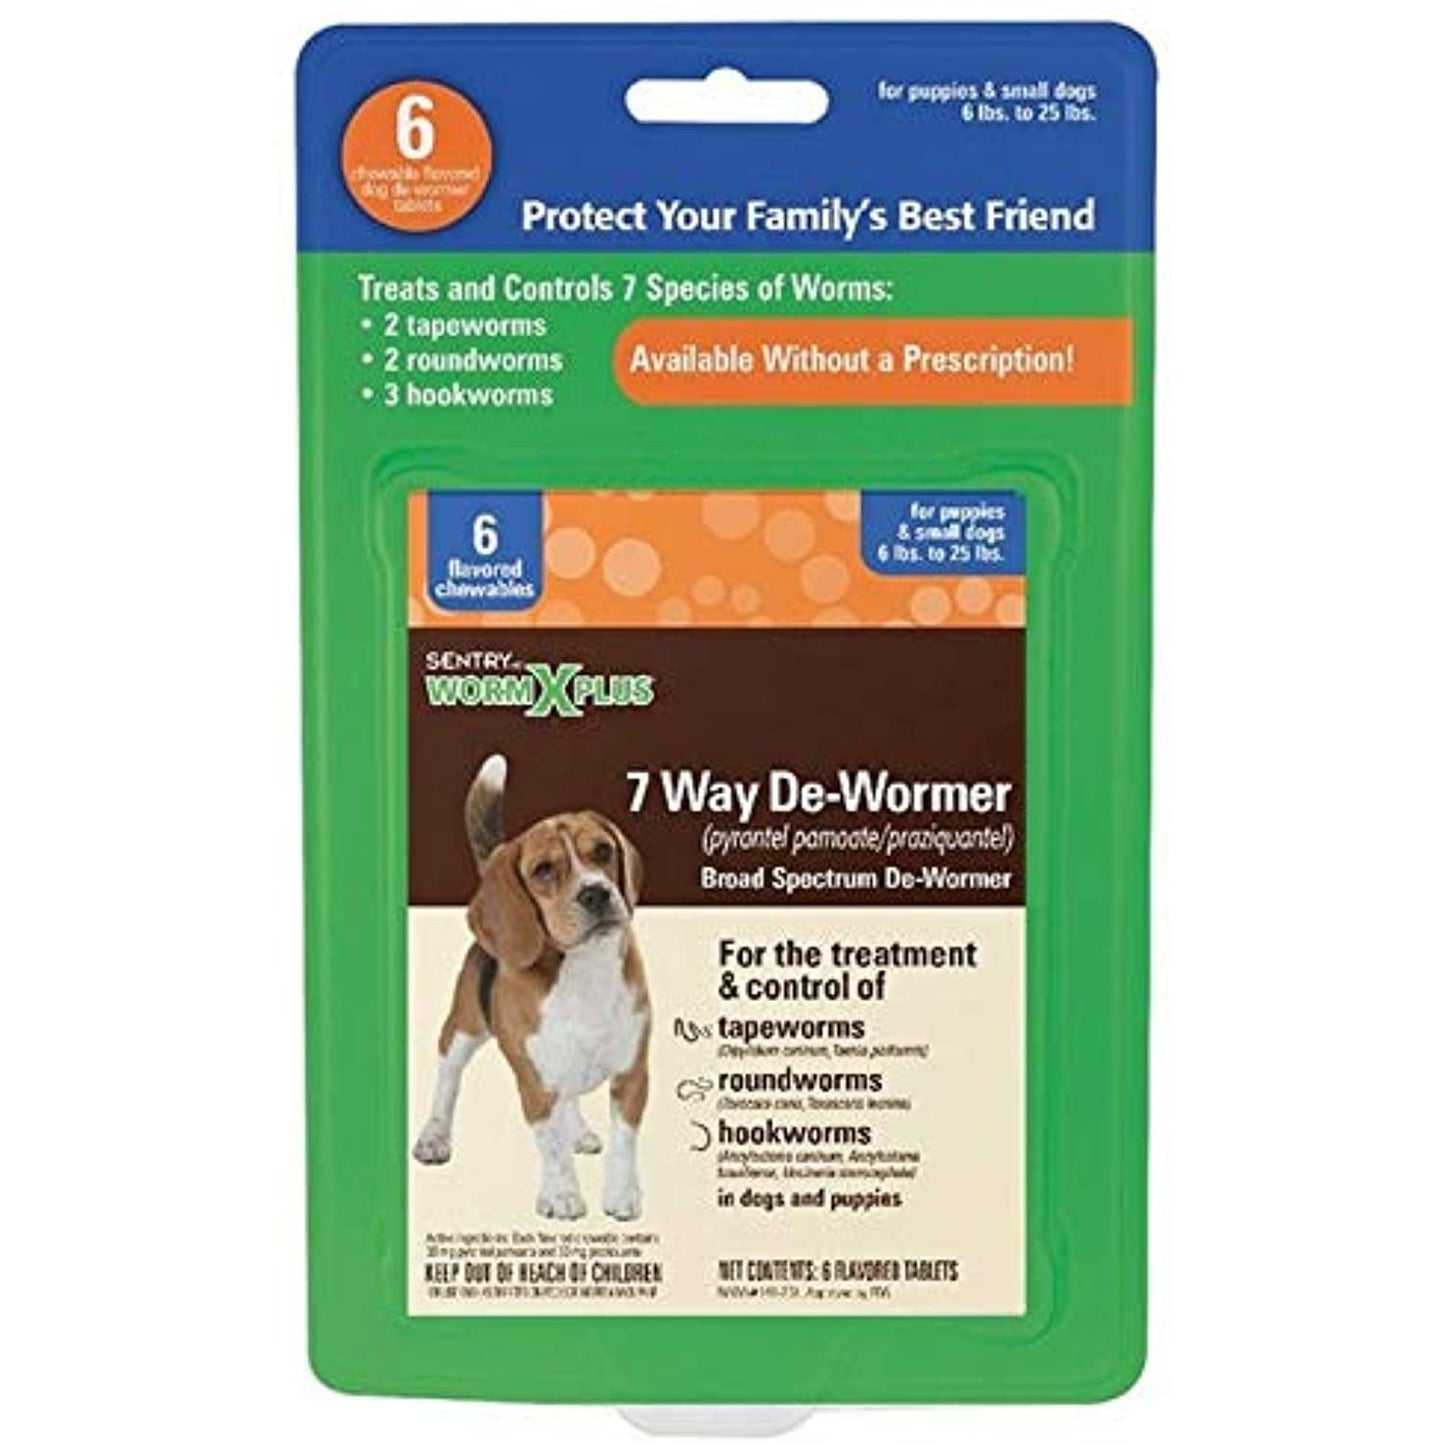 Sergeant's Pet Care Products Worm x Plus 7 Way De-Wormer Small Dog up to 25 pound 6 Ct